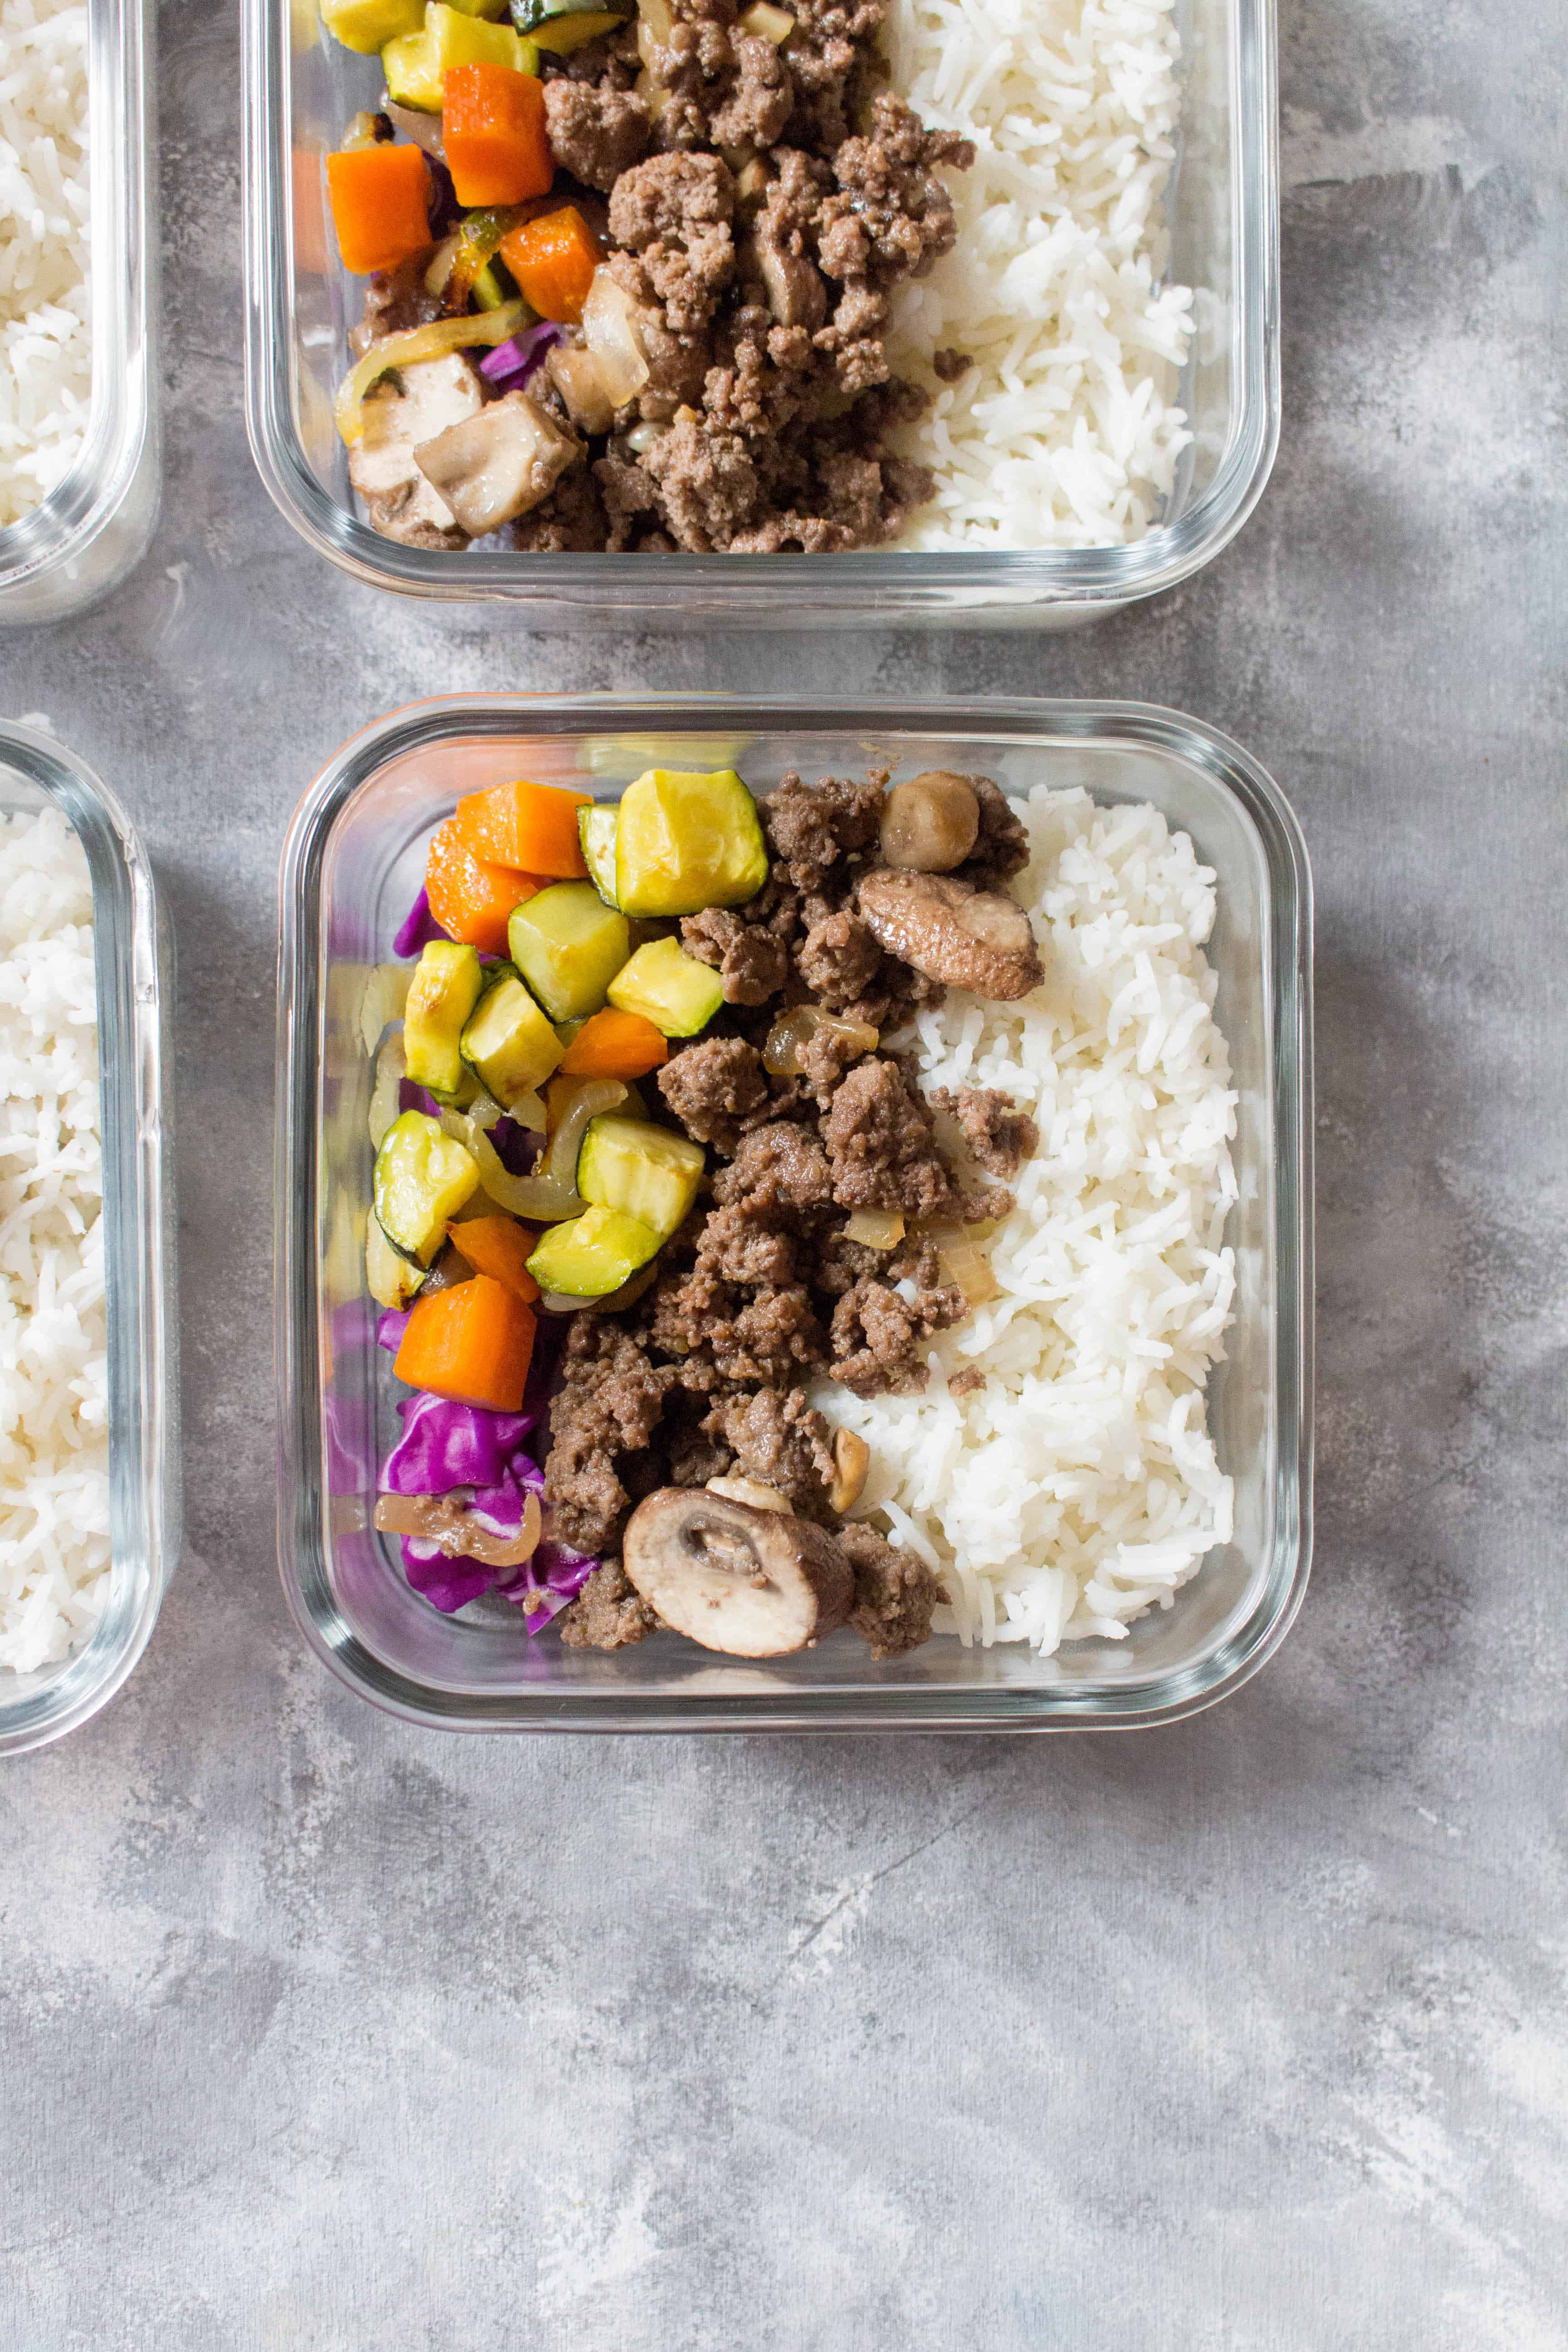 Meal prep containers with ground beef bulgogi bowls.